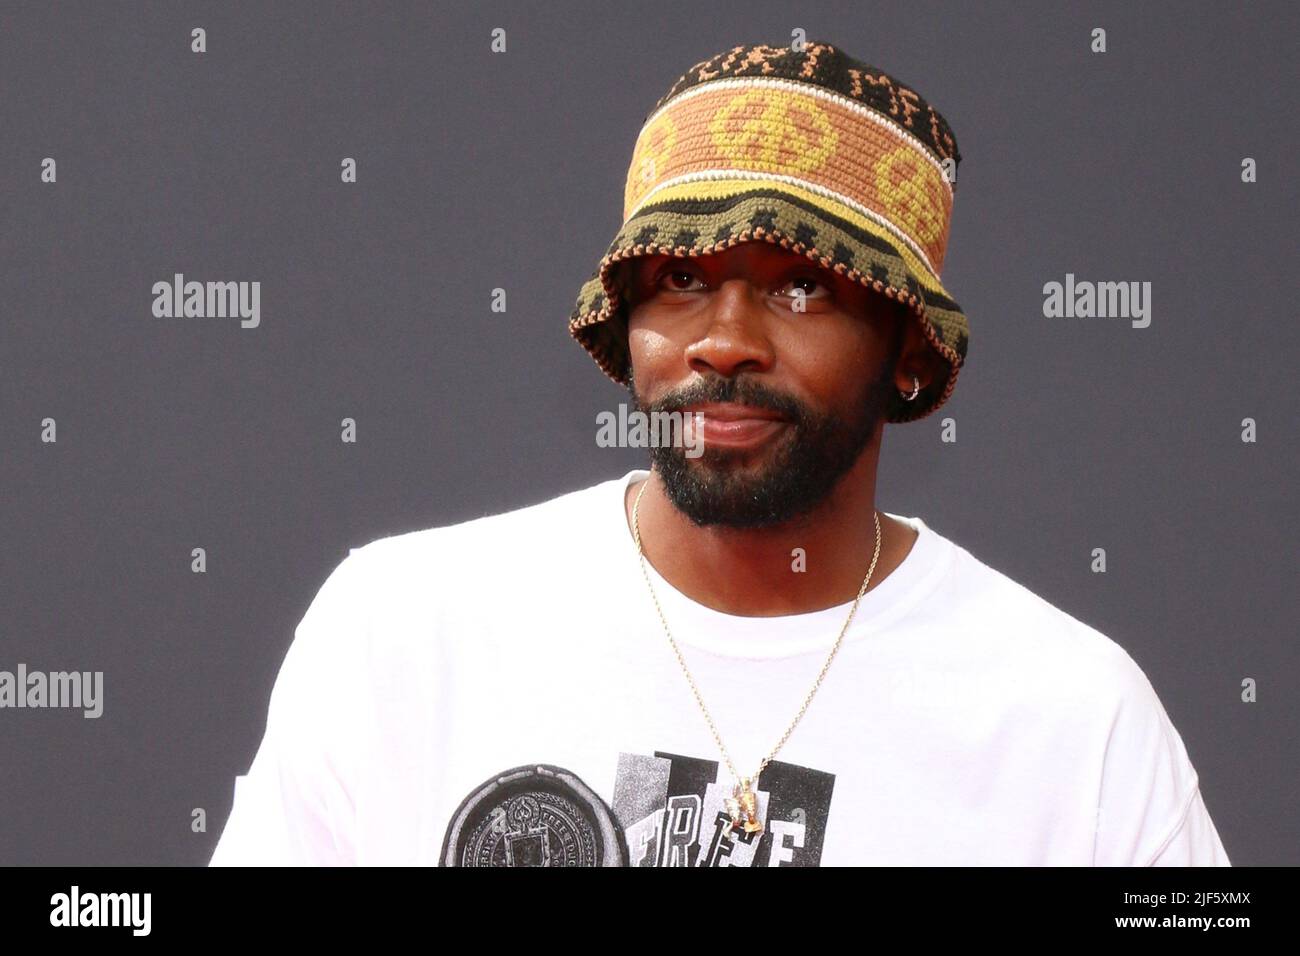 Los Angeles, CA. 26th June, 2022. Kyrie Irving at arrivals for BET Awards - Part 4, Microsoft Theater, Los Angeles, CA June 26, 2022. Credit: Priscilla Grant/Everett Collection/Alamy Live News Stock Photo